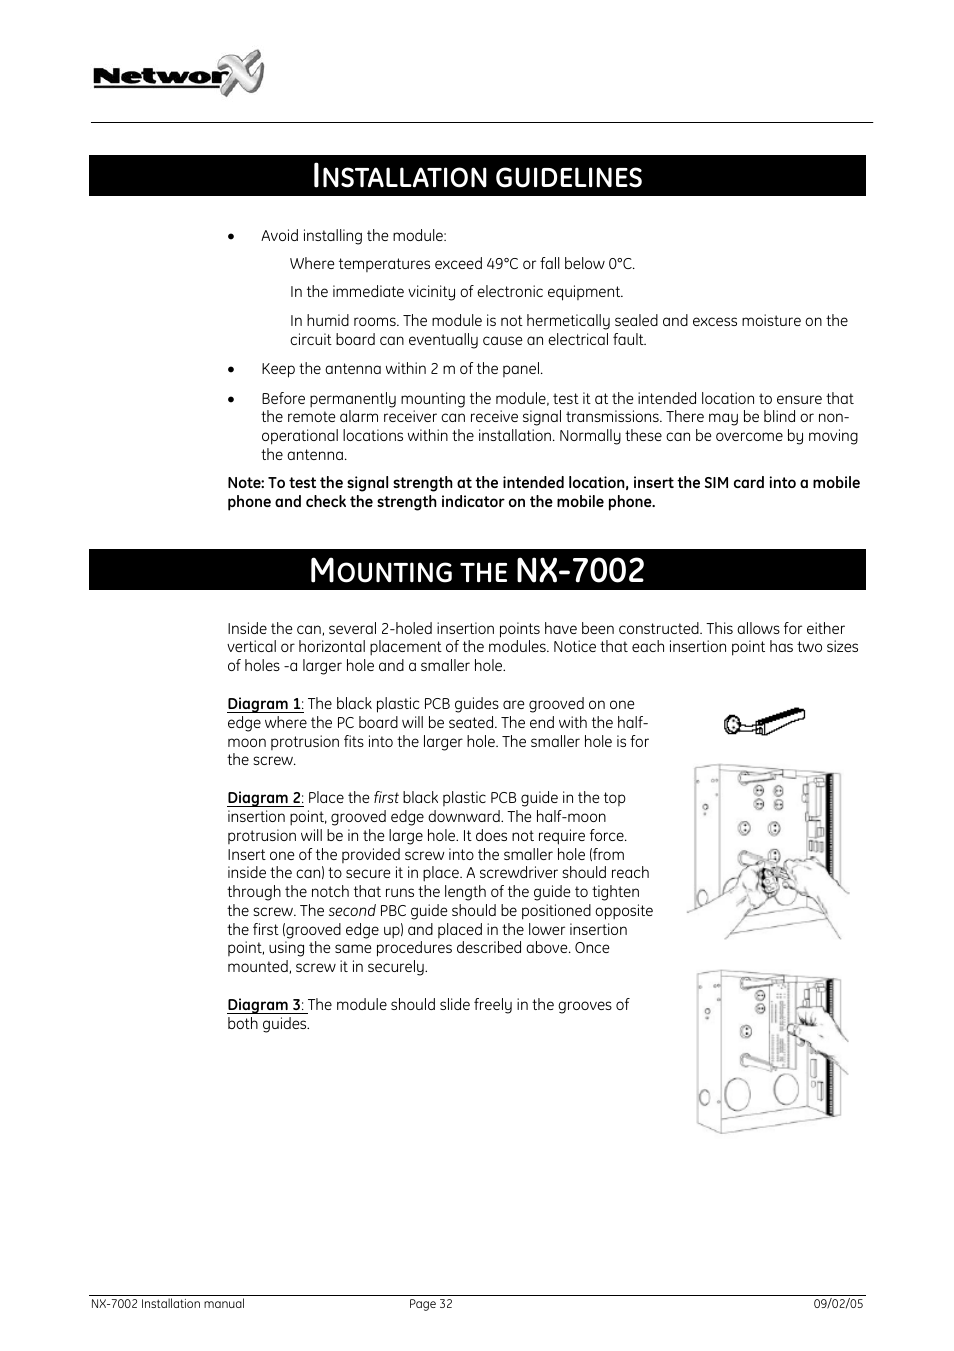 Installation guidelines, Mounting the nx-7002, Nx-7002 | Nstallation guidelines, Ounting the | GE NetworX NX-7002 User Manual | Page 32 / 39